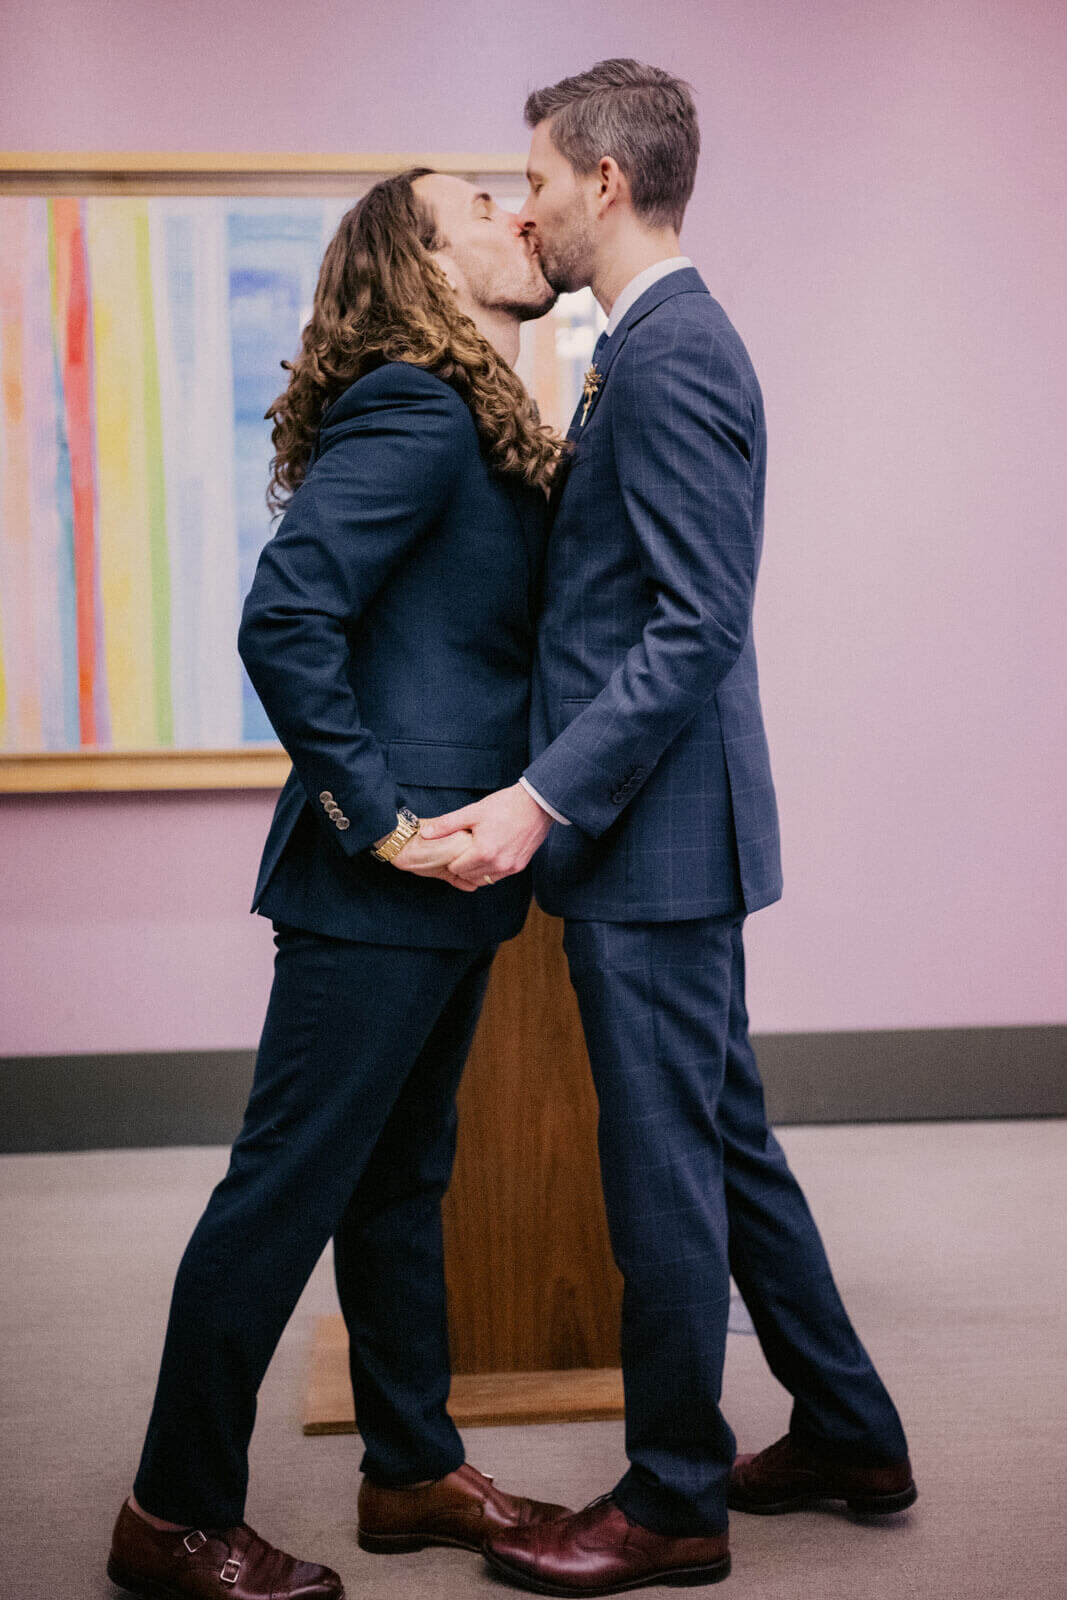 The two grooms kiss each other while holding hands during the ceremony. NYC City Hall Elopement Image by Jenny Fu Studio